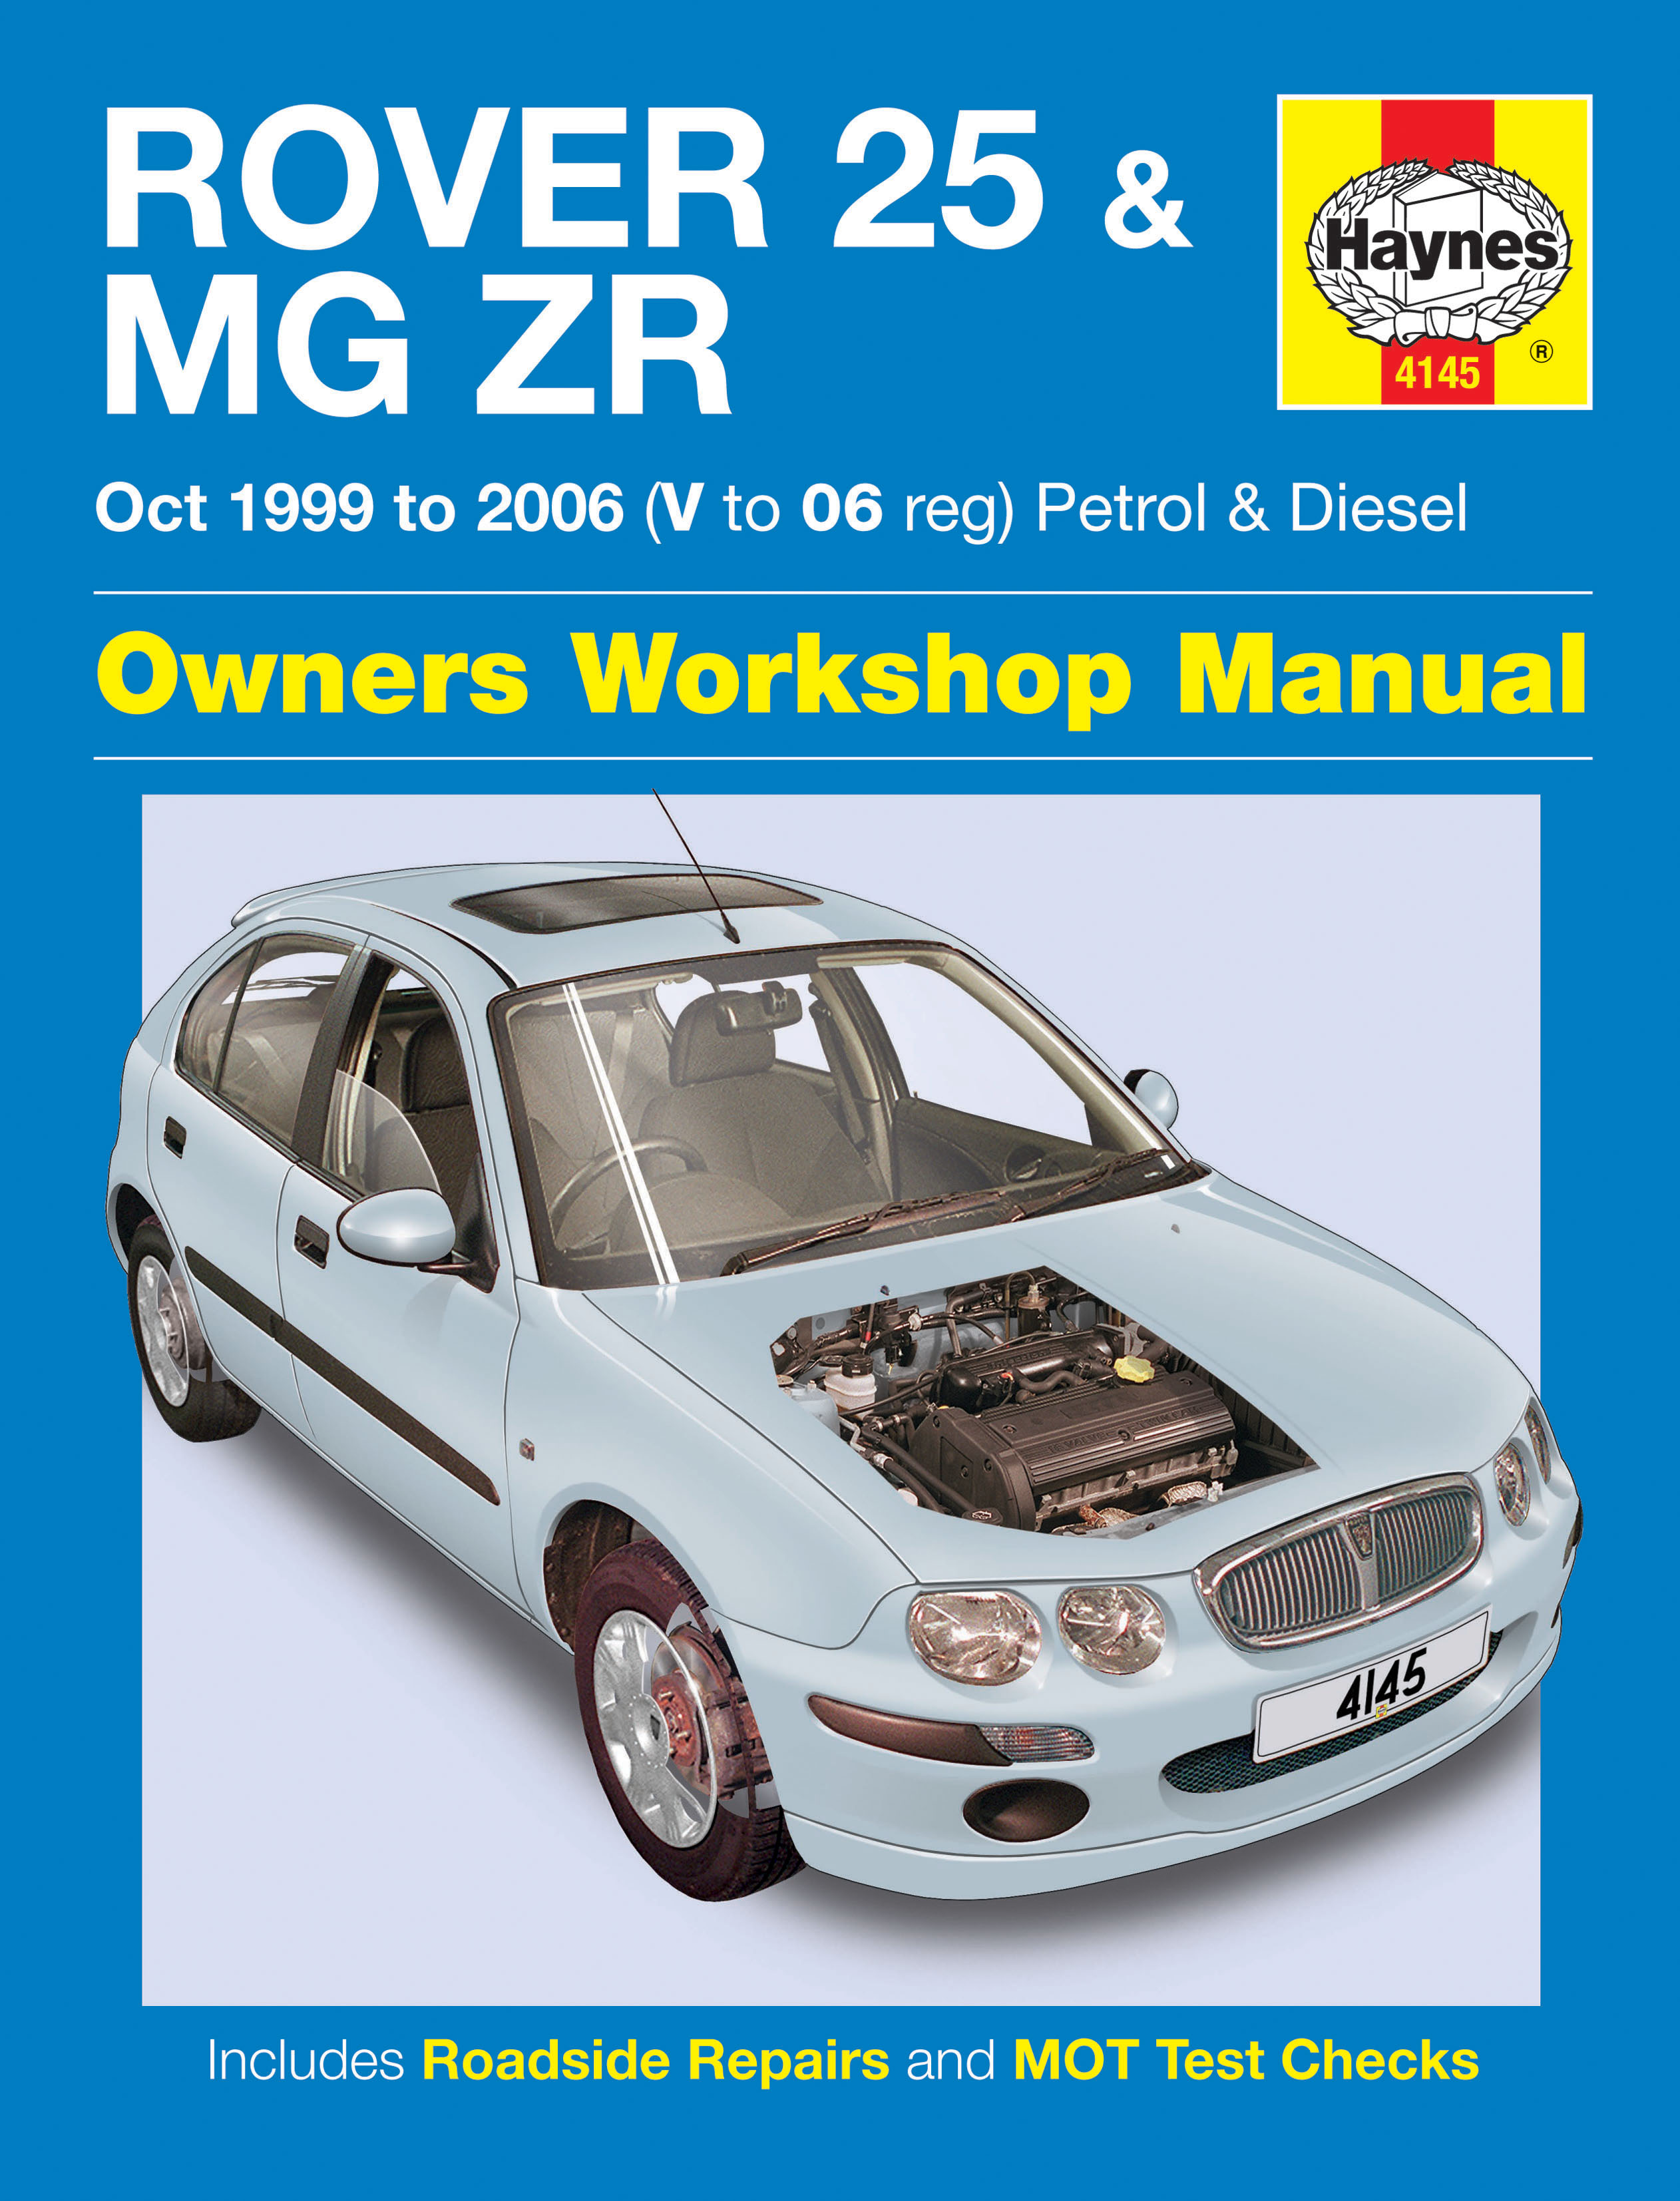 *NEW/UNUSED* RCL 0596, 2nd Edition Rover 25 Owner's Handbook 